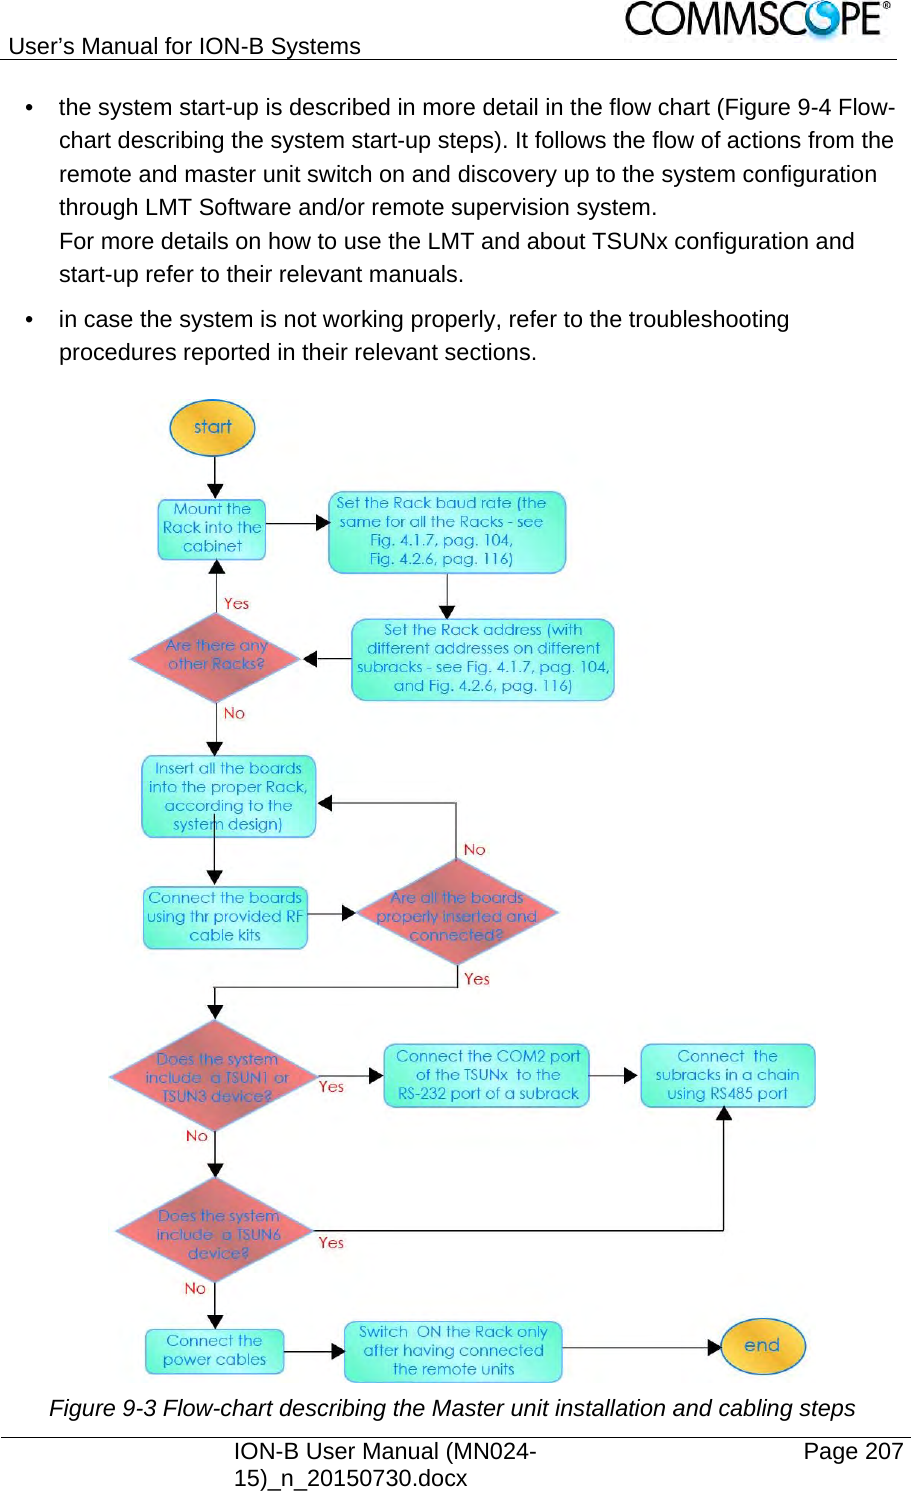 User’s Manual for ION-B Systems    ION-B User Manual (MN024-15)_n_20150730.docx  Page 207 •  the system start-up is described in more detail in the flow chart (Figure 9-4 Flow-chart describing the system start-up steps). It follows the flow of actions from the remote and master unit switch on and discovery up to the system configuration through LMT Software and/or remote supervision system.  For more details on how to use the LMT and about TSUNx configuration and start-up refer to their relevant manuals. •  in case the system is not working properly, refer to the troubleshooting procedures reported in their relevant sections.   Figure 9-3 Flow-chart describing the Master unit installation and cabling steps 